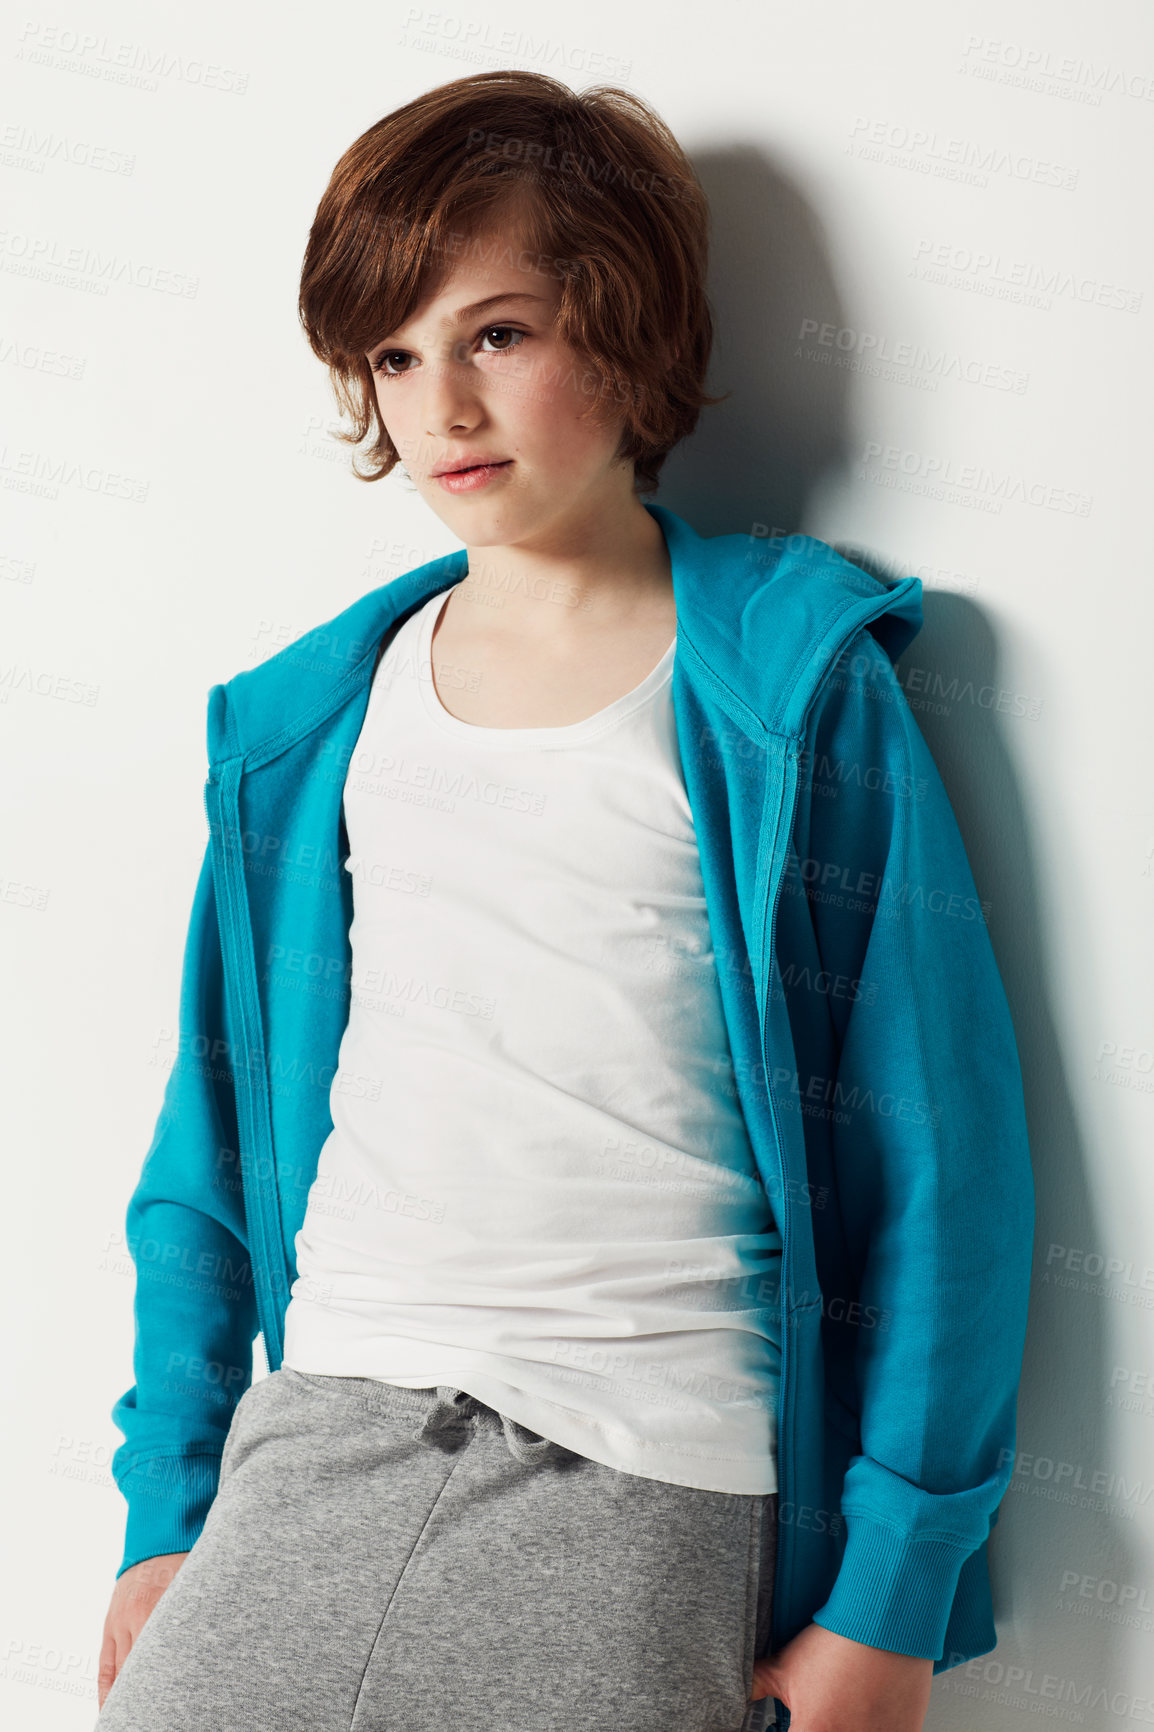 Buy stock photo Cute preteen boy wearing casual attire while isolated on white